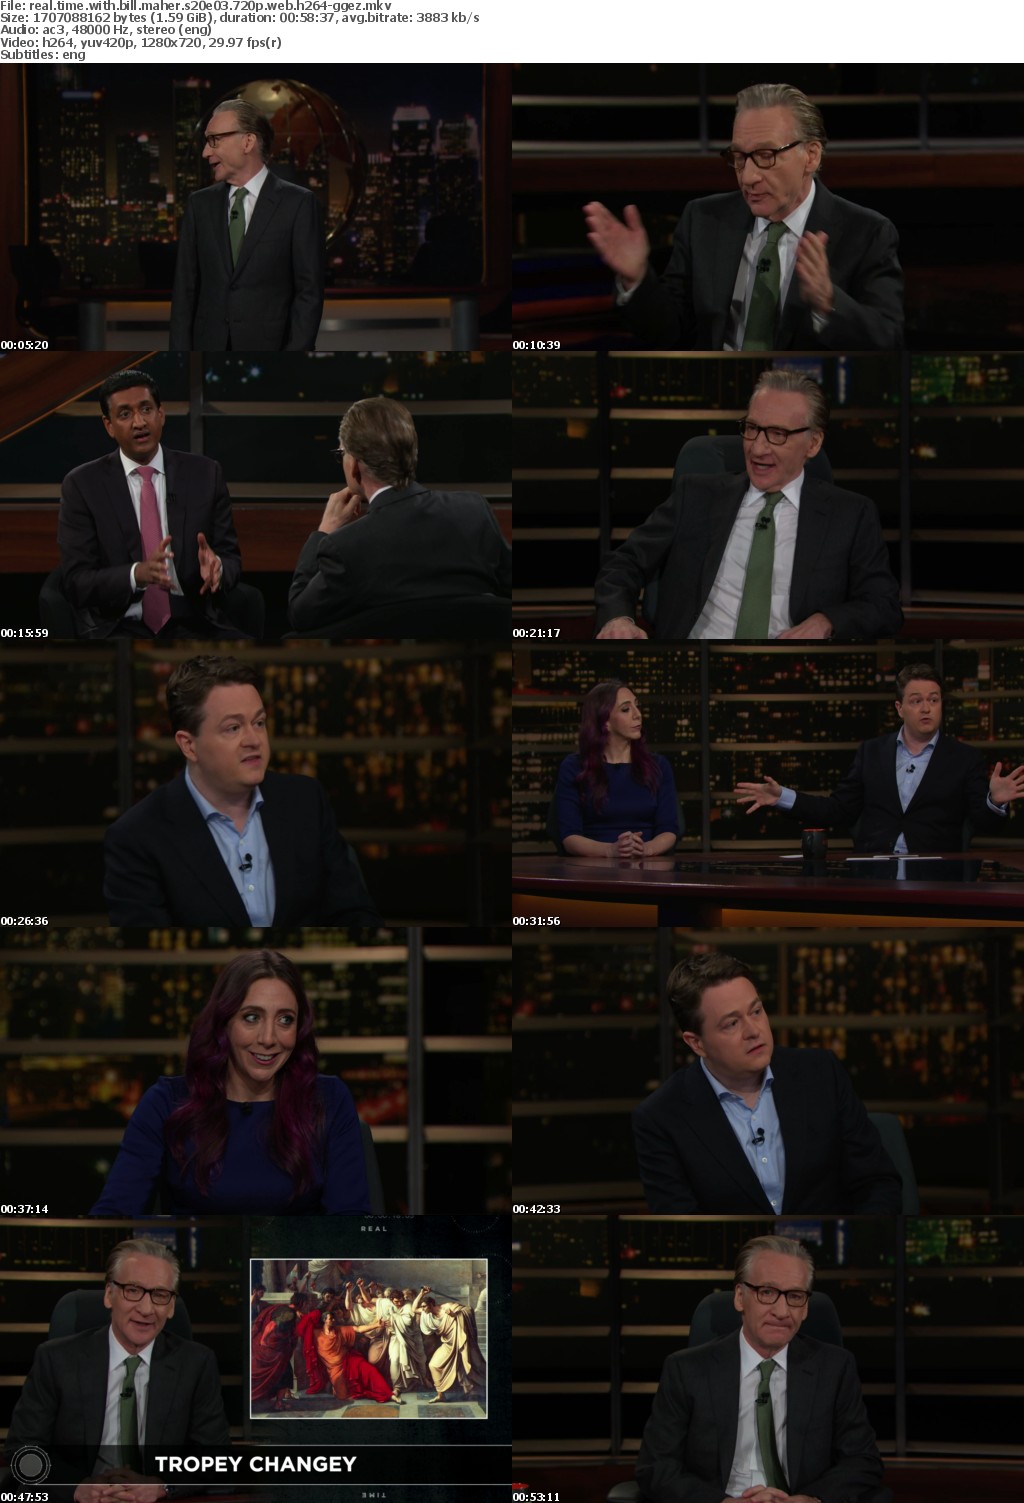 Real Time with Bill Maher S20E03 720p WEB H264-GGEZ